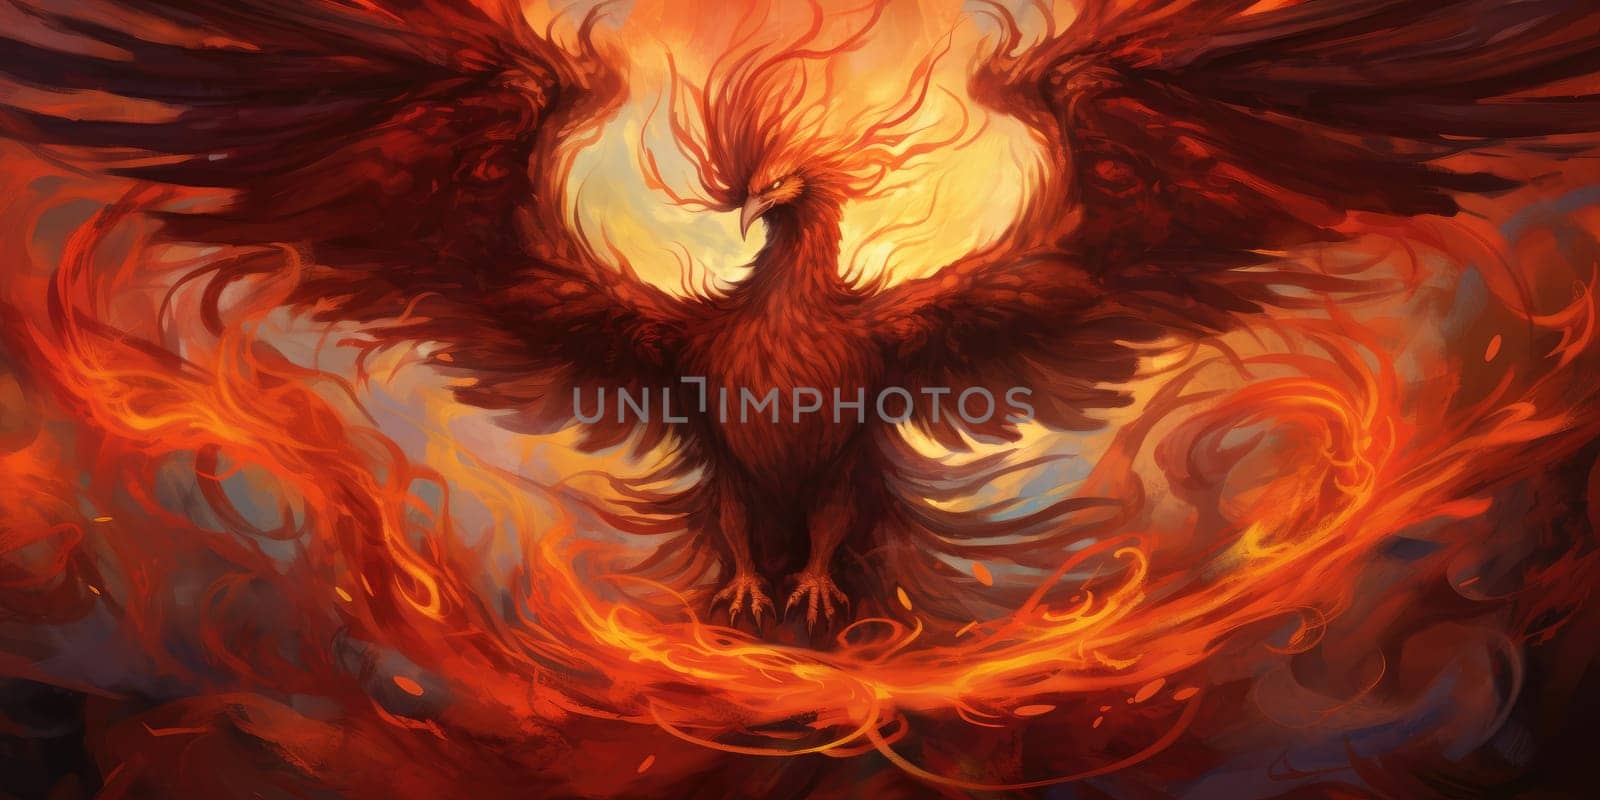 Portrait of phoenix on a fiery background, mystical burning itself on a funeral pyre and rising from the ashes with renewed youth to live through another cycle